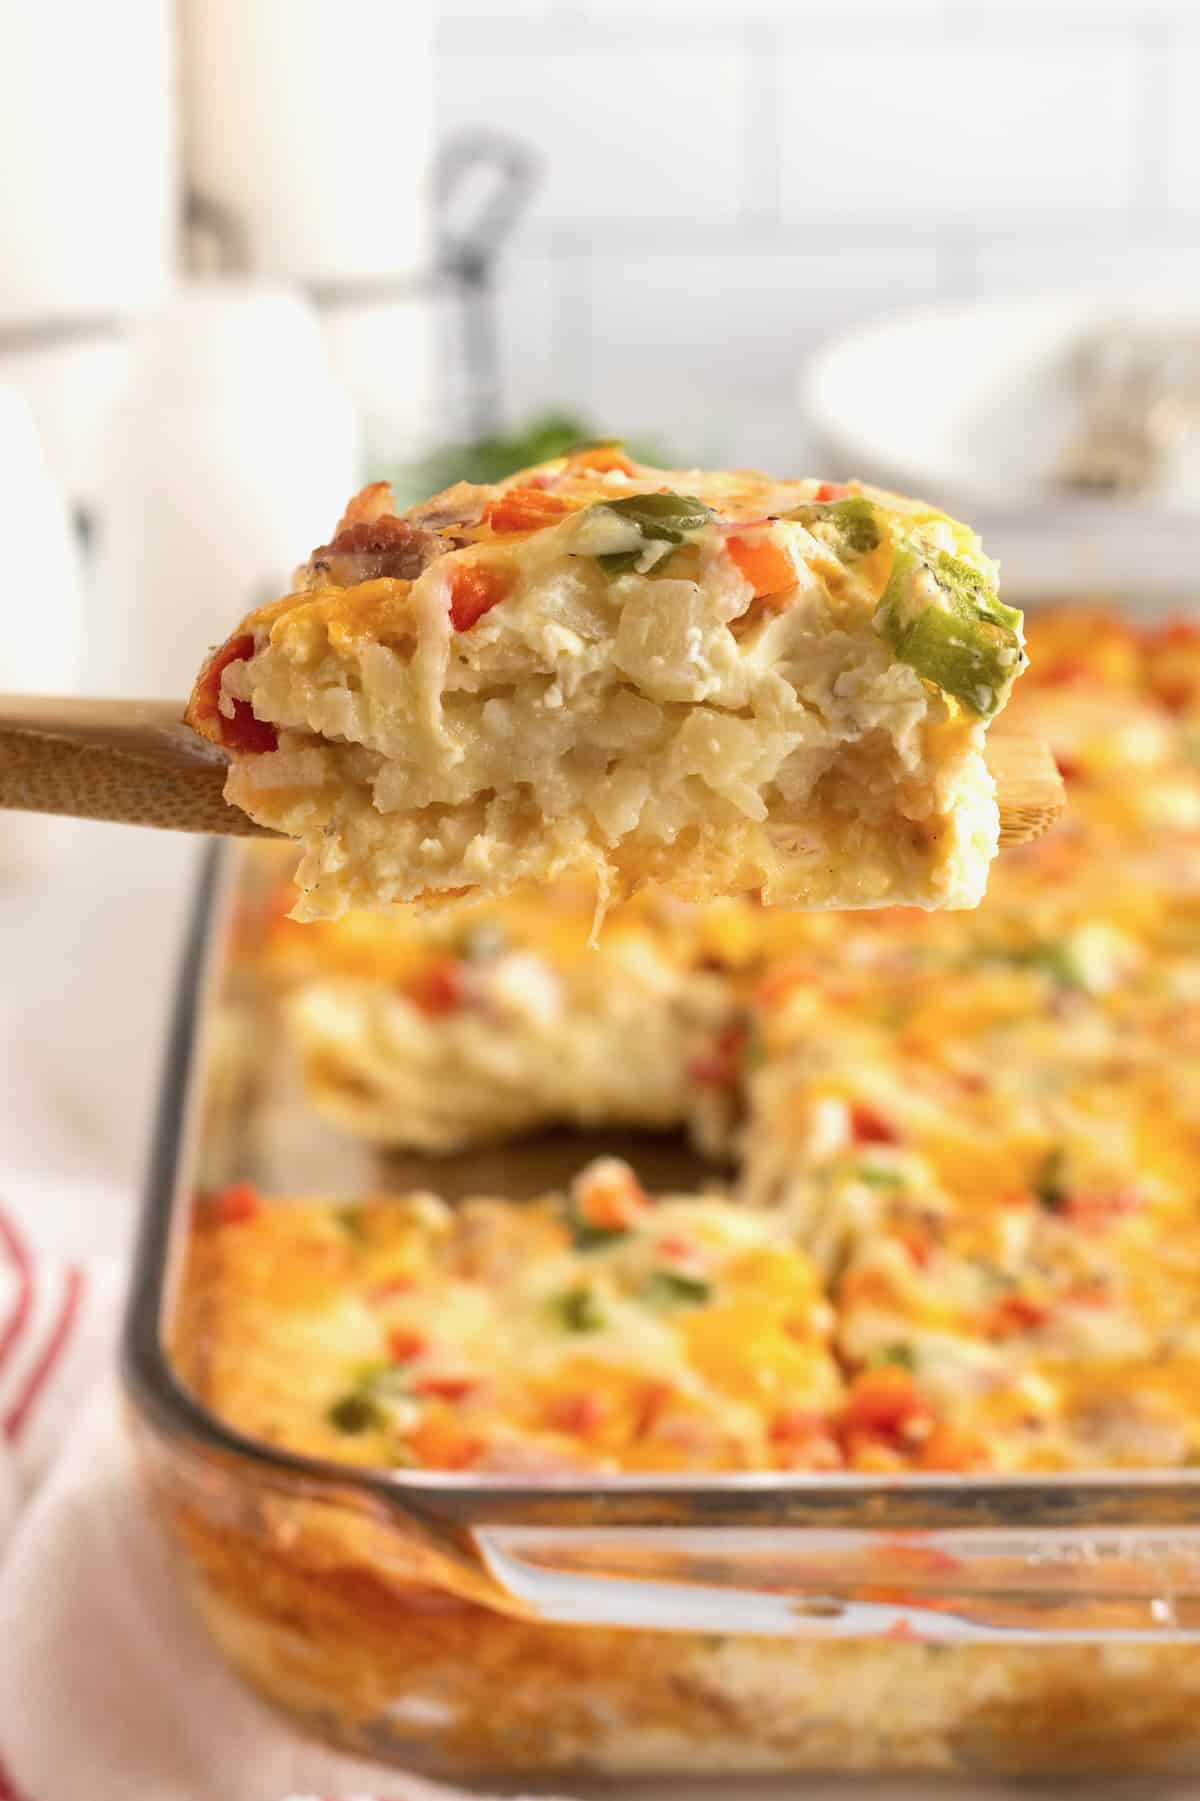 A slice of breakfast casserole on a wooden spatula with a glass baking dish of Hash Brown Breakfast Casserole in the background.